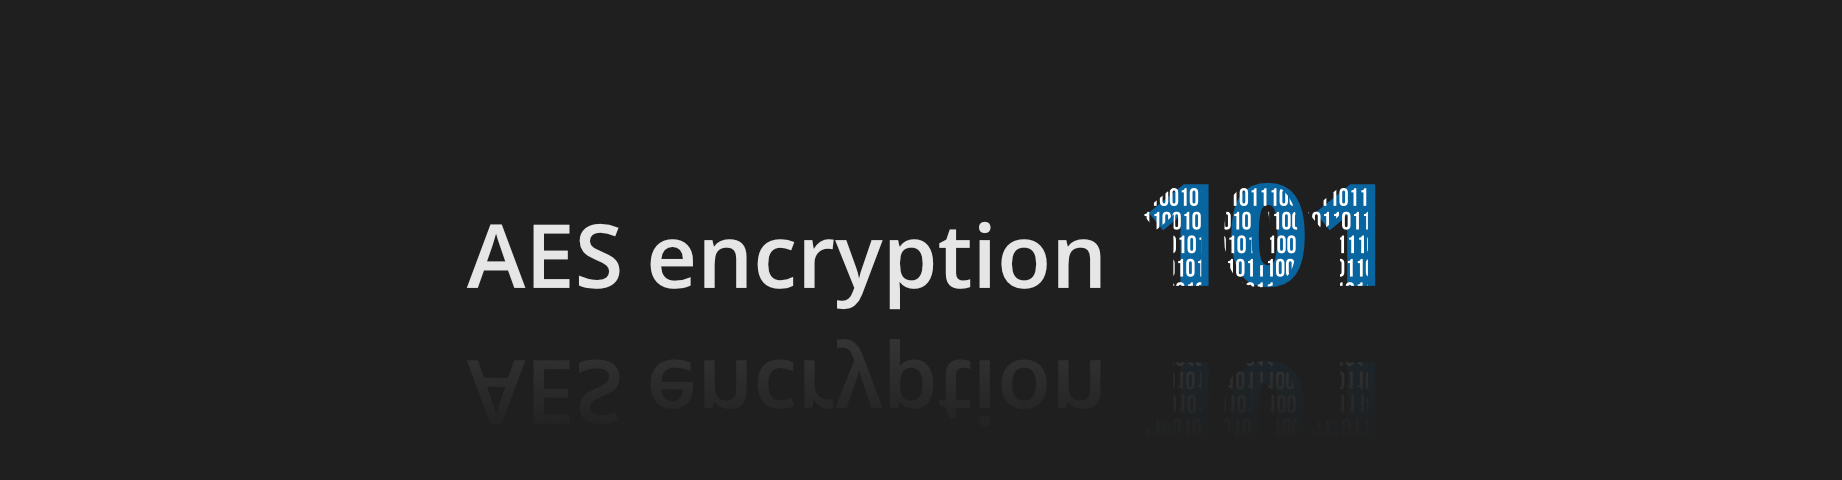 AES encryption introduction